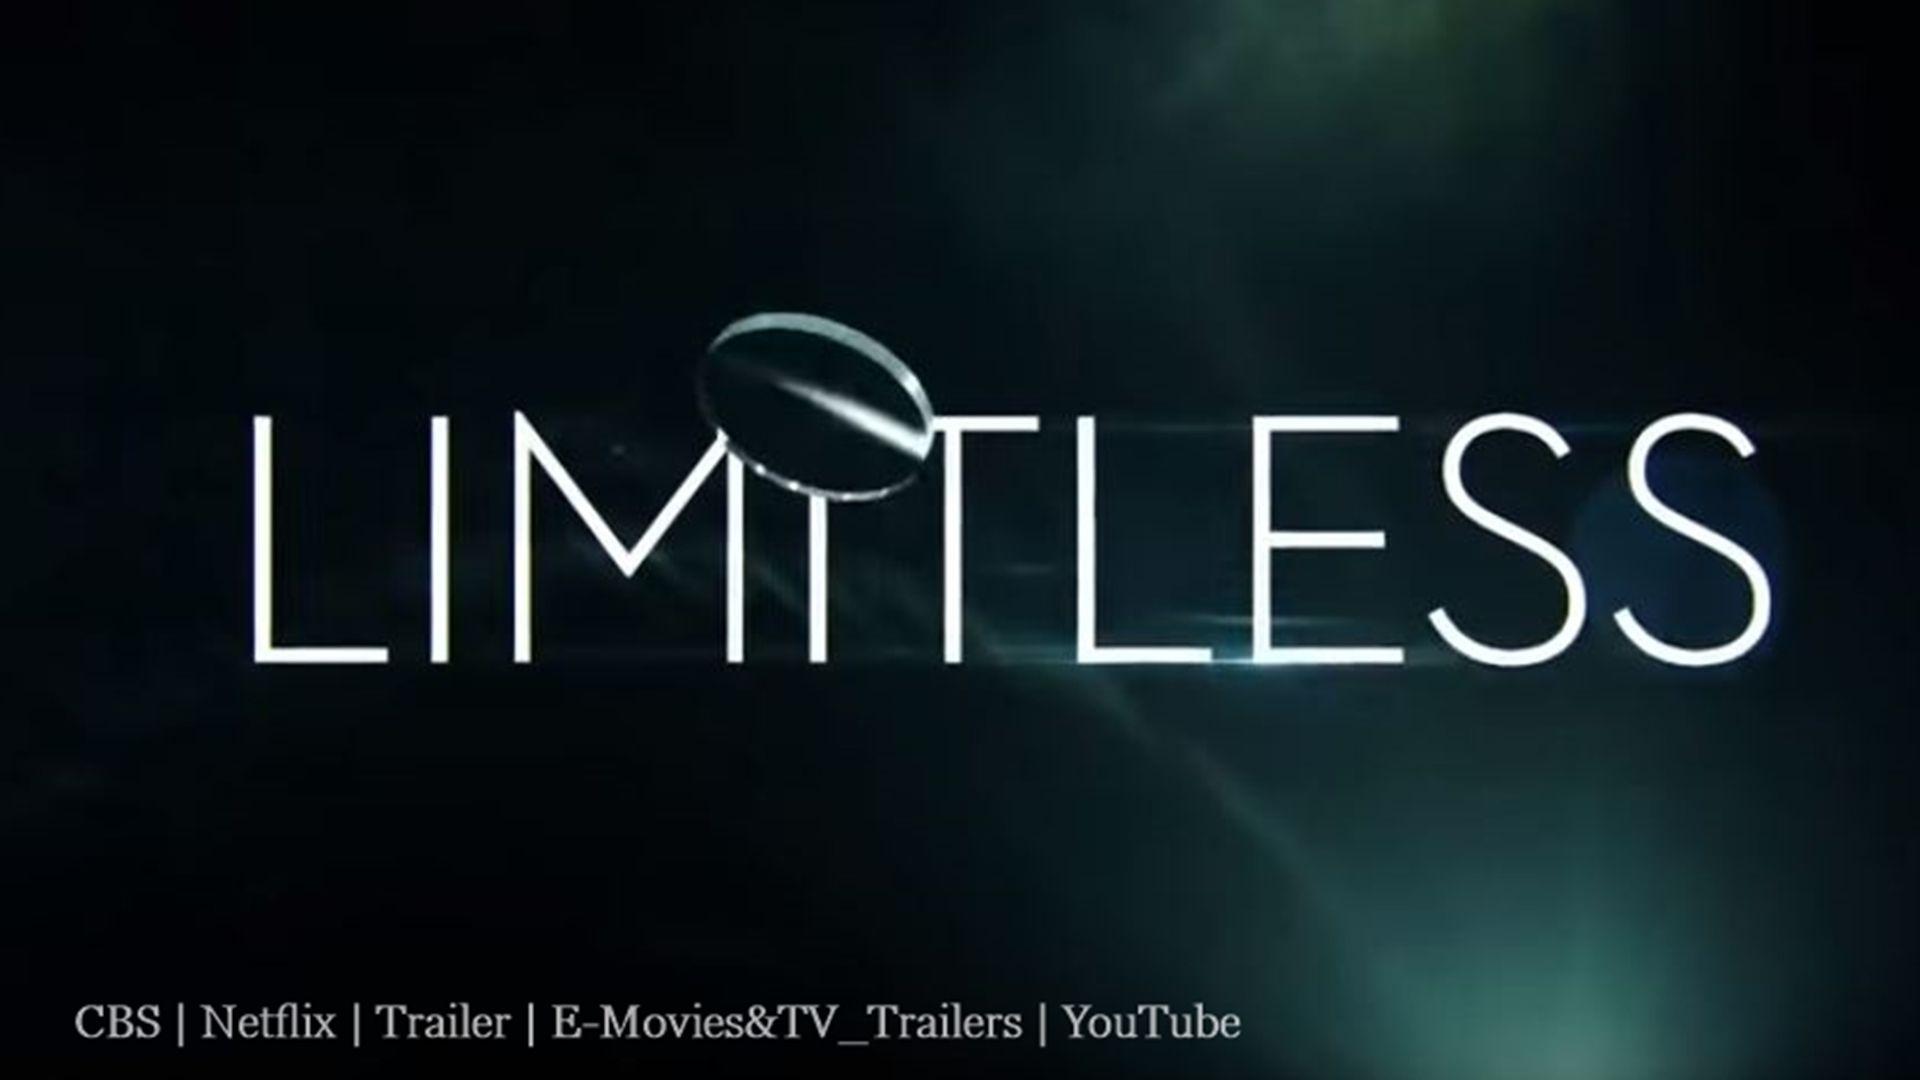 Wallpaper Limitless 2011 1920x1200 HD Picture Image